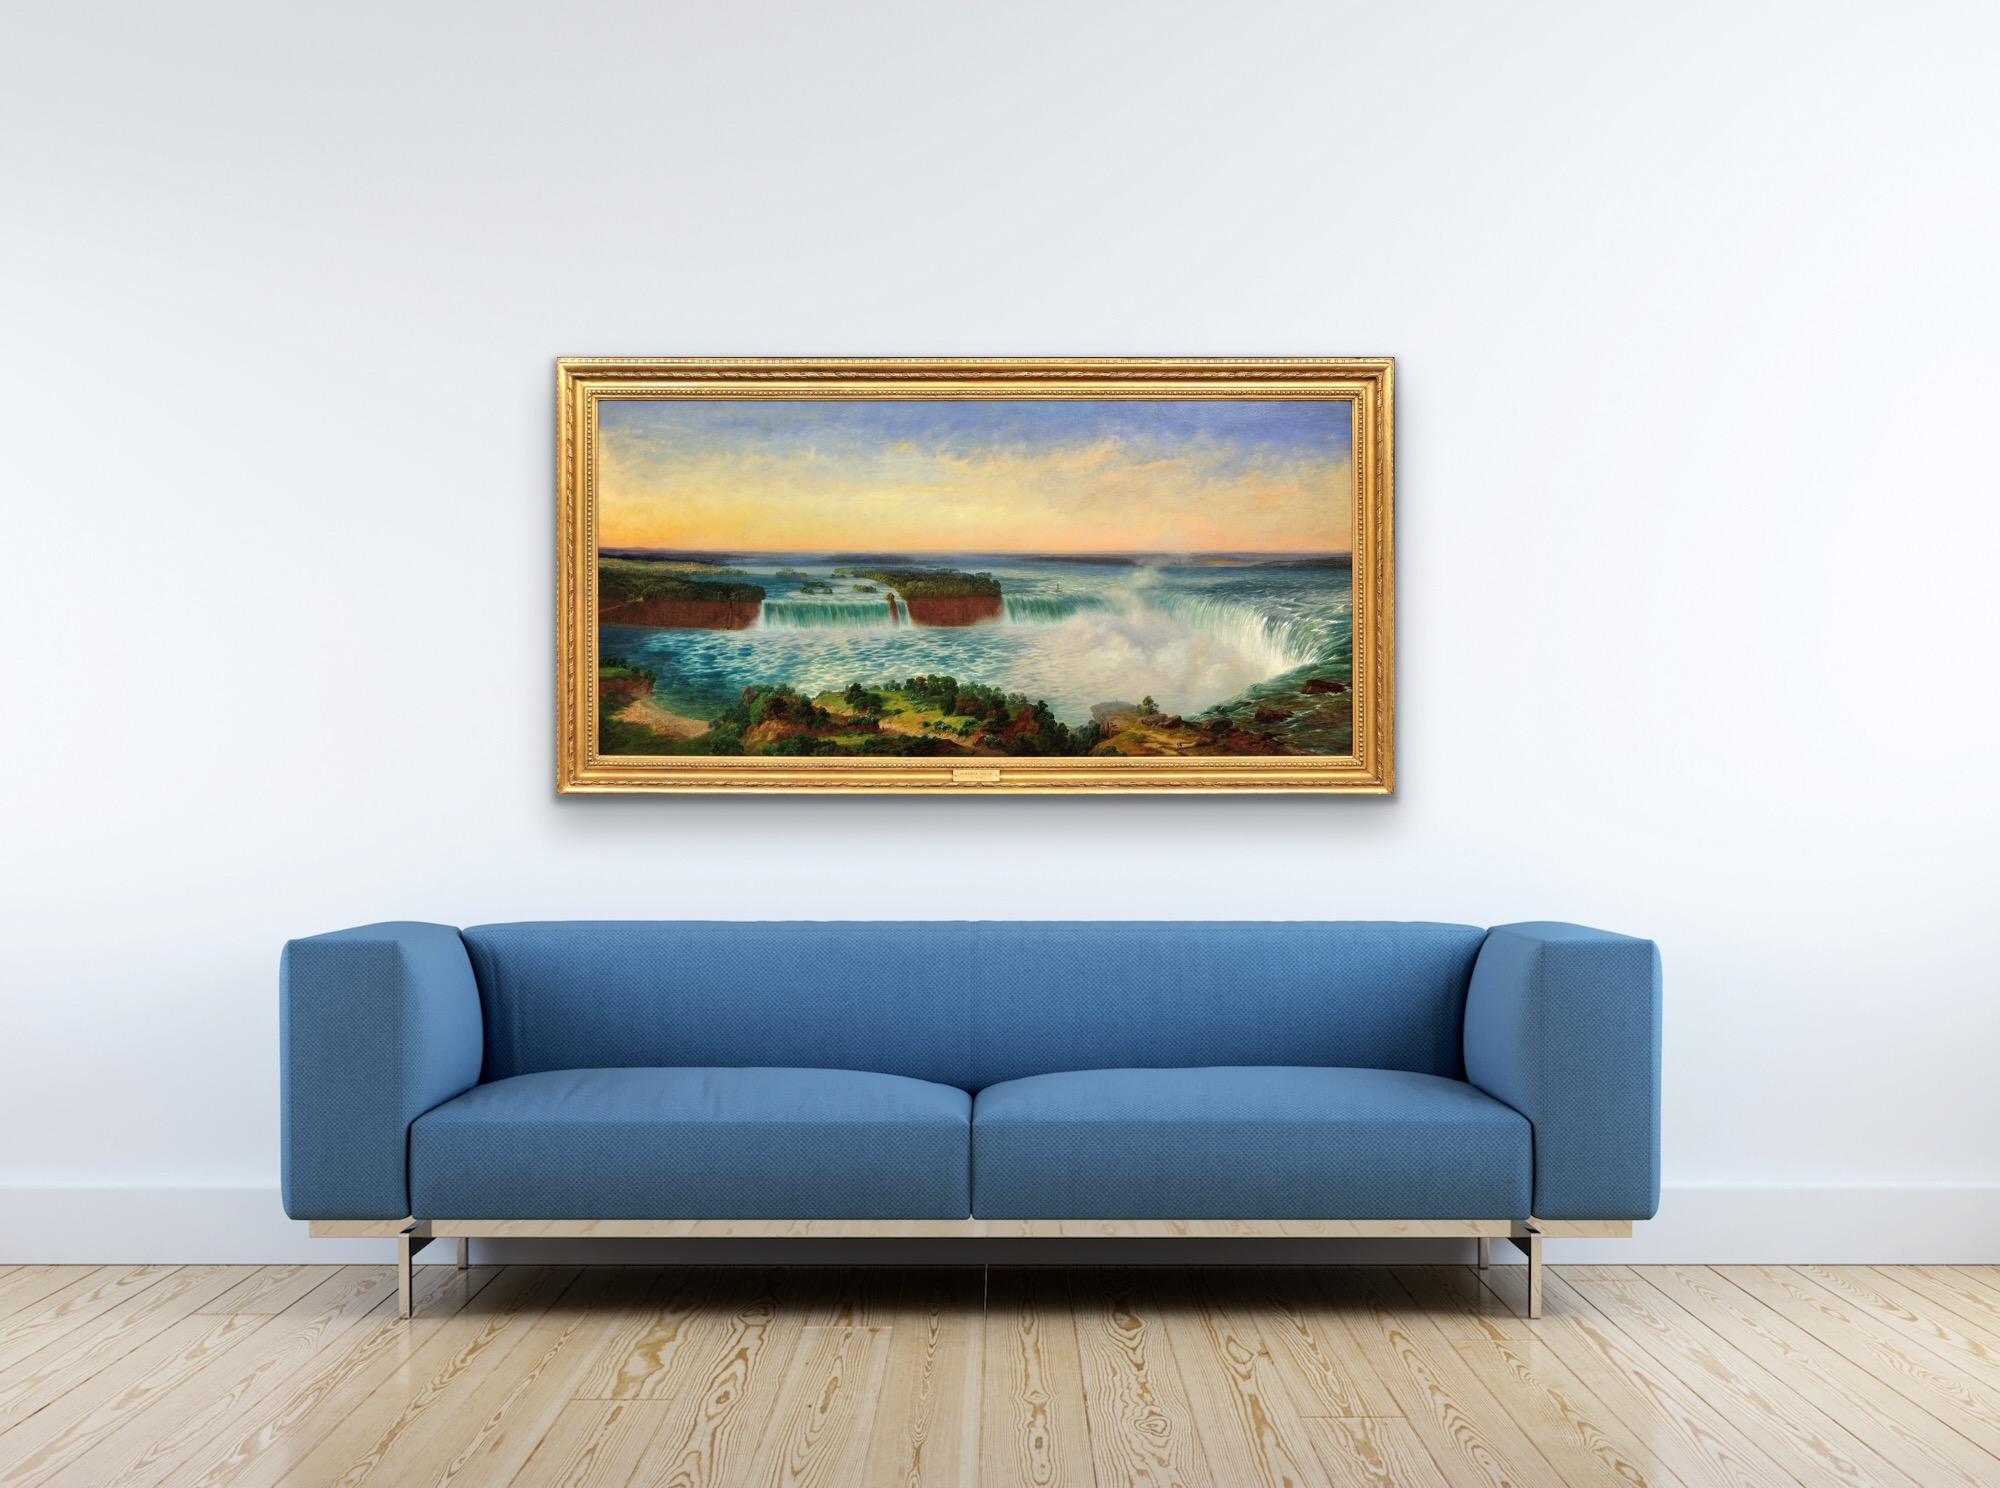 Niagara Falls, Ontario. View Across to New York State. Buffalo NY in Distance.  For Sale 11